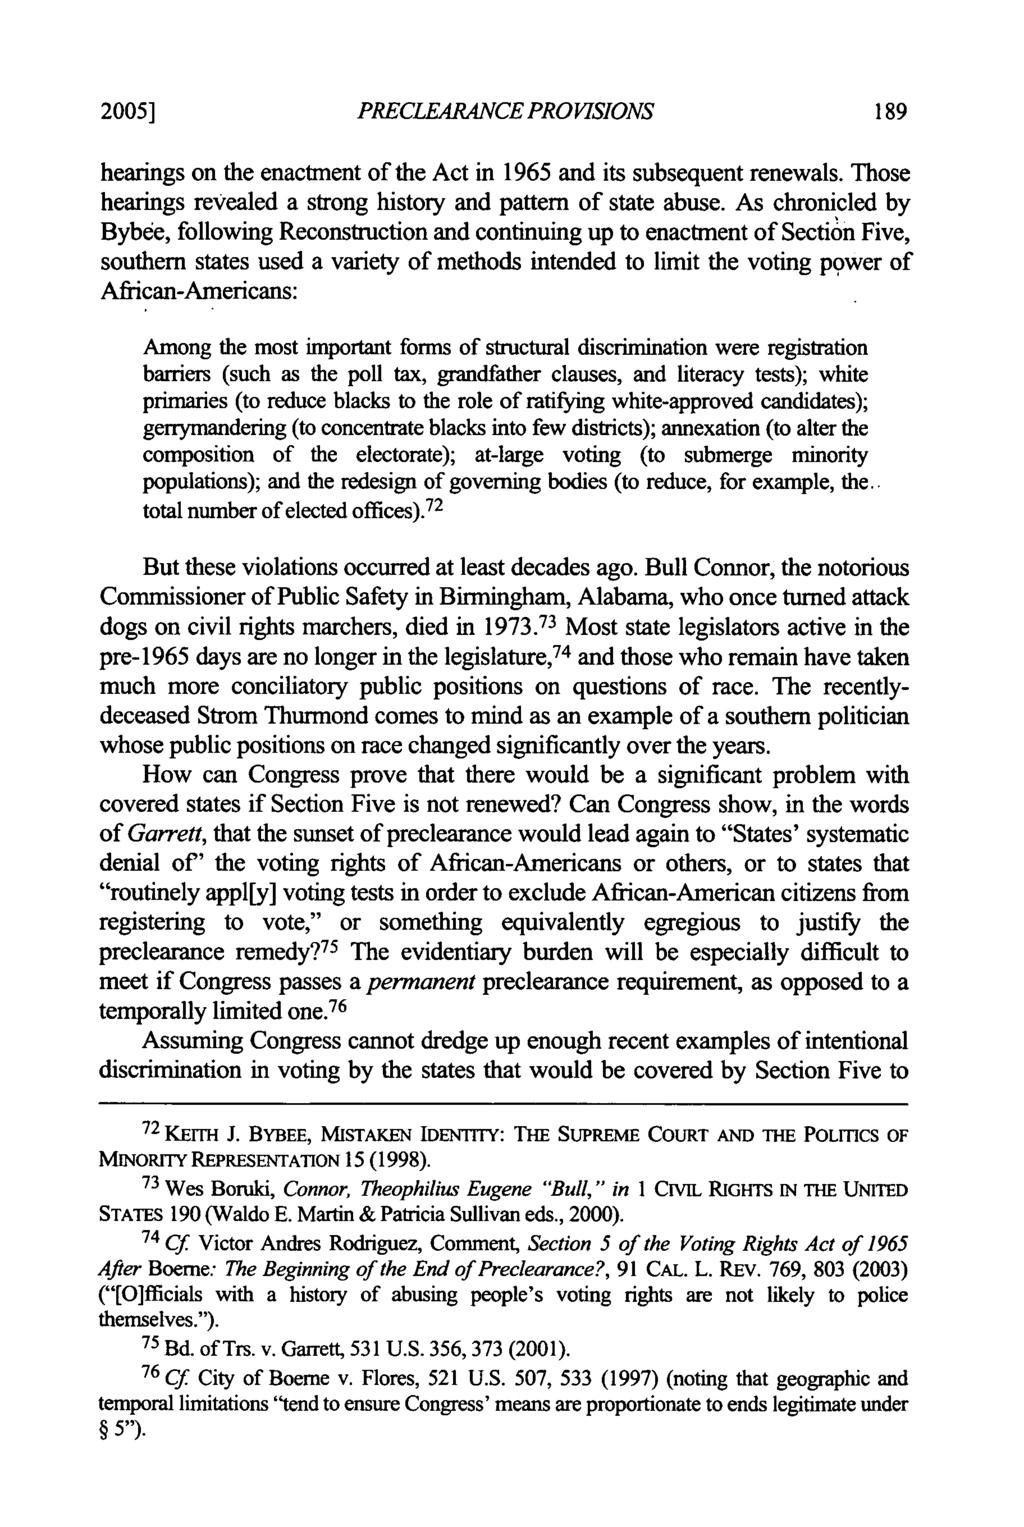 2005] PRECLEARANCE PROVISIONS hearings on the enactment of the Act in 1965 and its subsequent renewals. Those hearings revealed a strong history and pattern of state abuse.